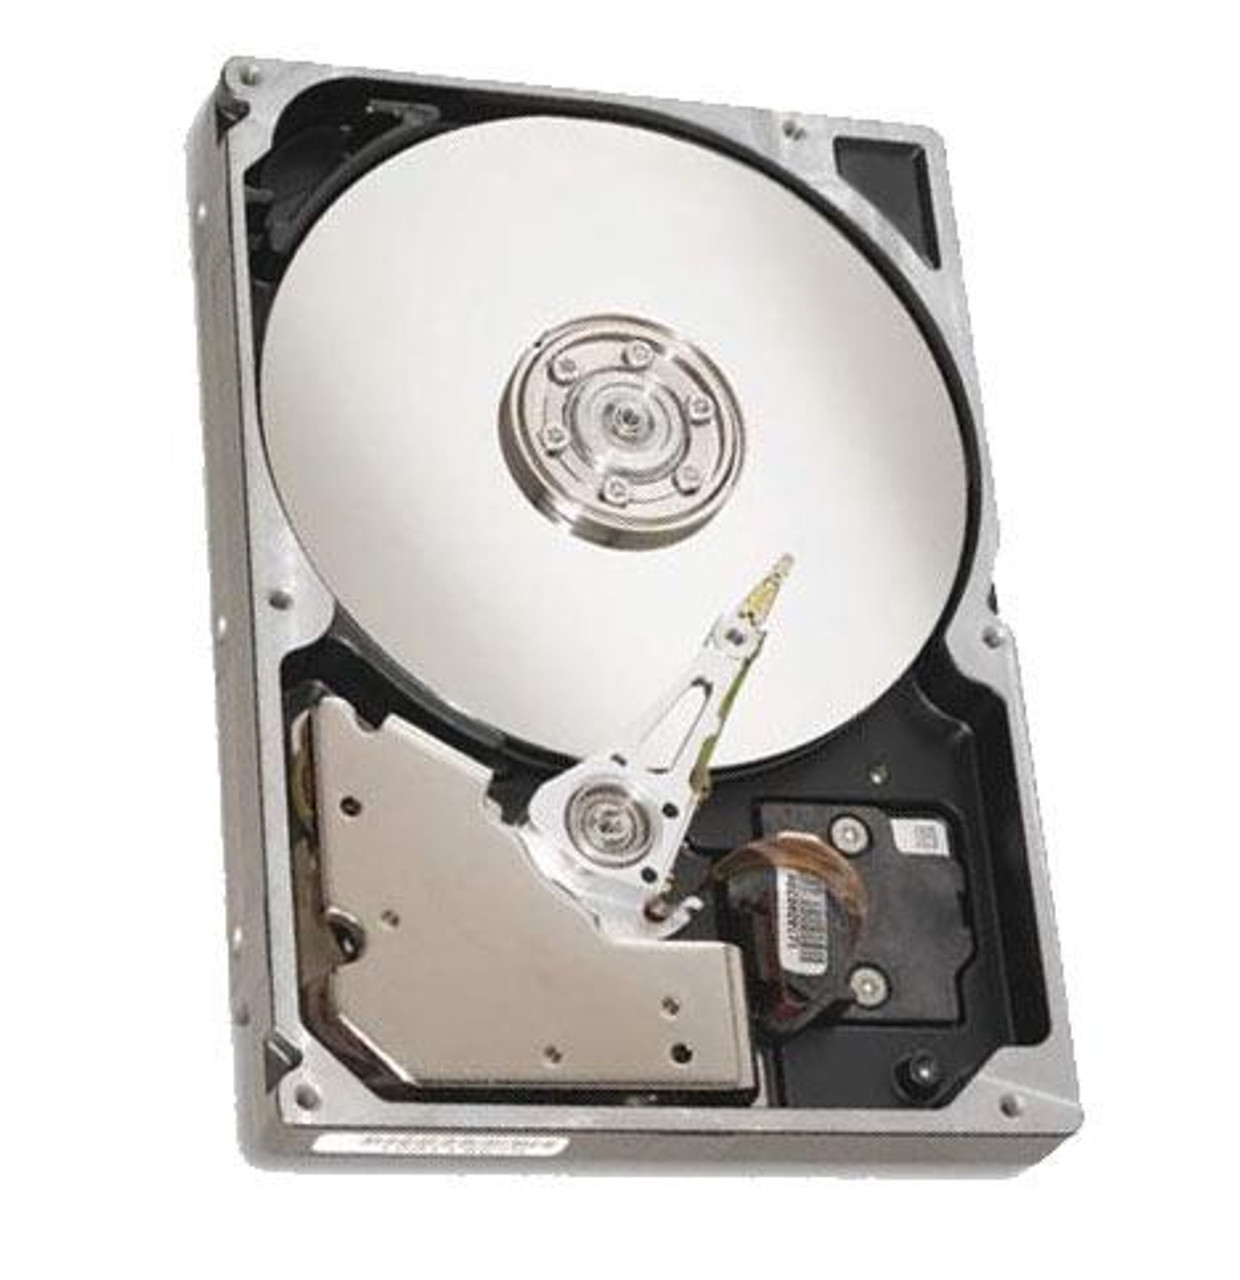 0R512-U Dell 73GB 10000RPM Ultra-320 SCSI 80-Pin Hot Swap 8MB Cache 3.5-inch Internal Hard Drive with Tray